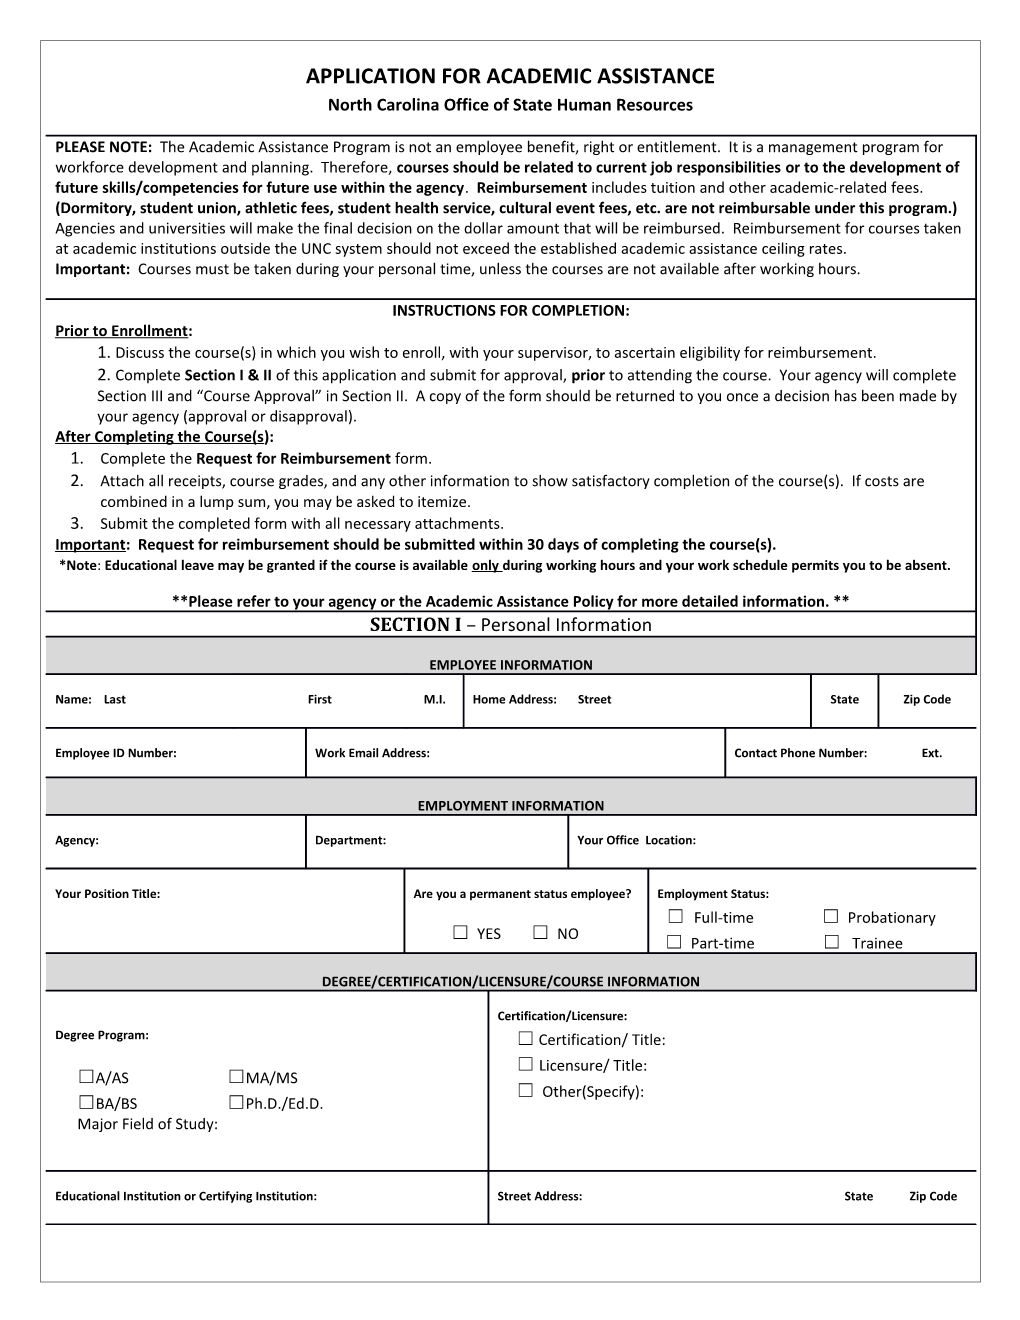 APPLICATION for ACADEMIC ASSISTANCE North Carolina Office of State Human Resources